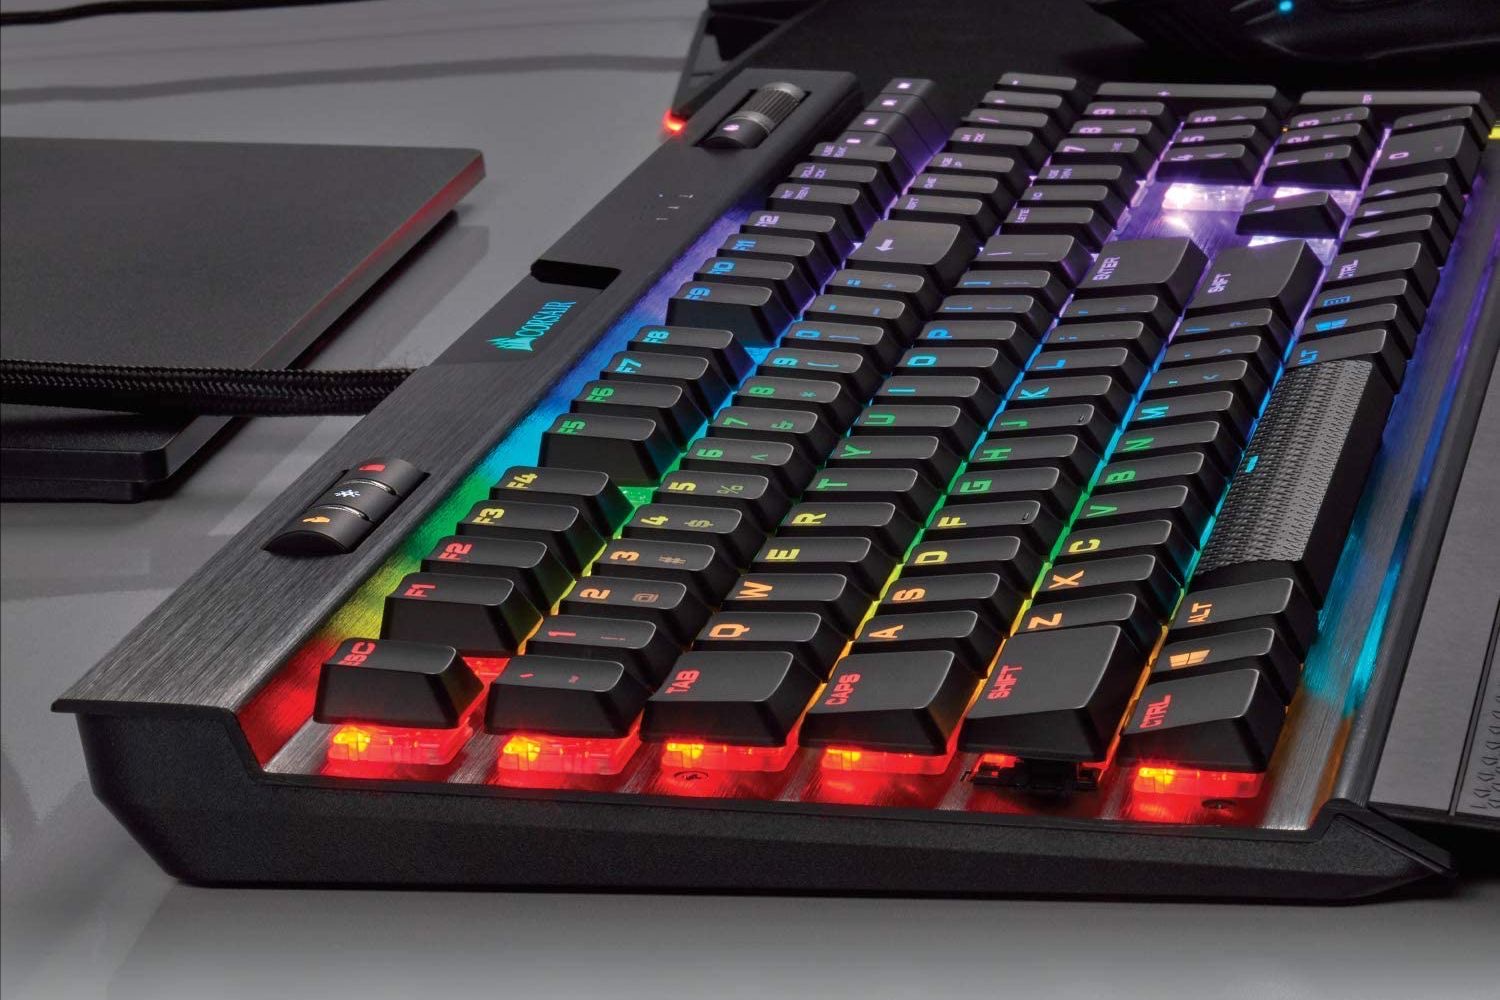 How to turn keyboard lighting on and off | Digital Trends